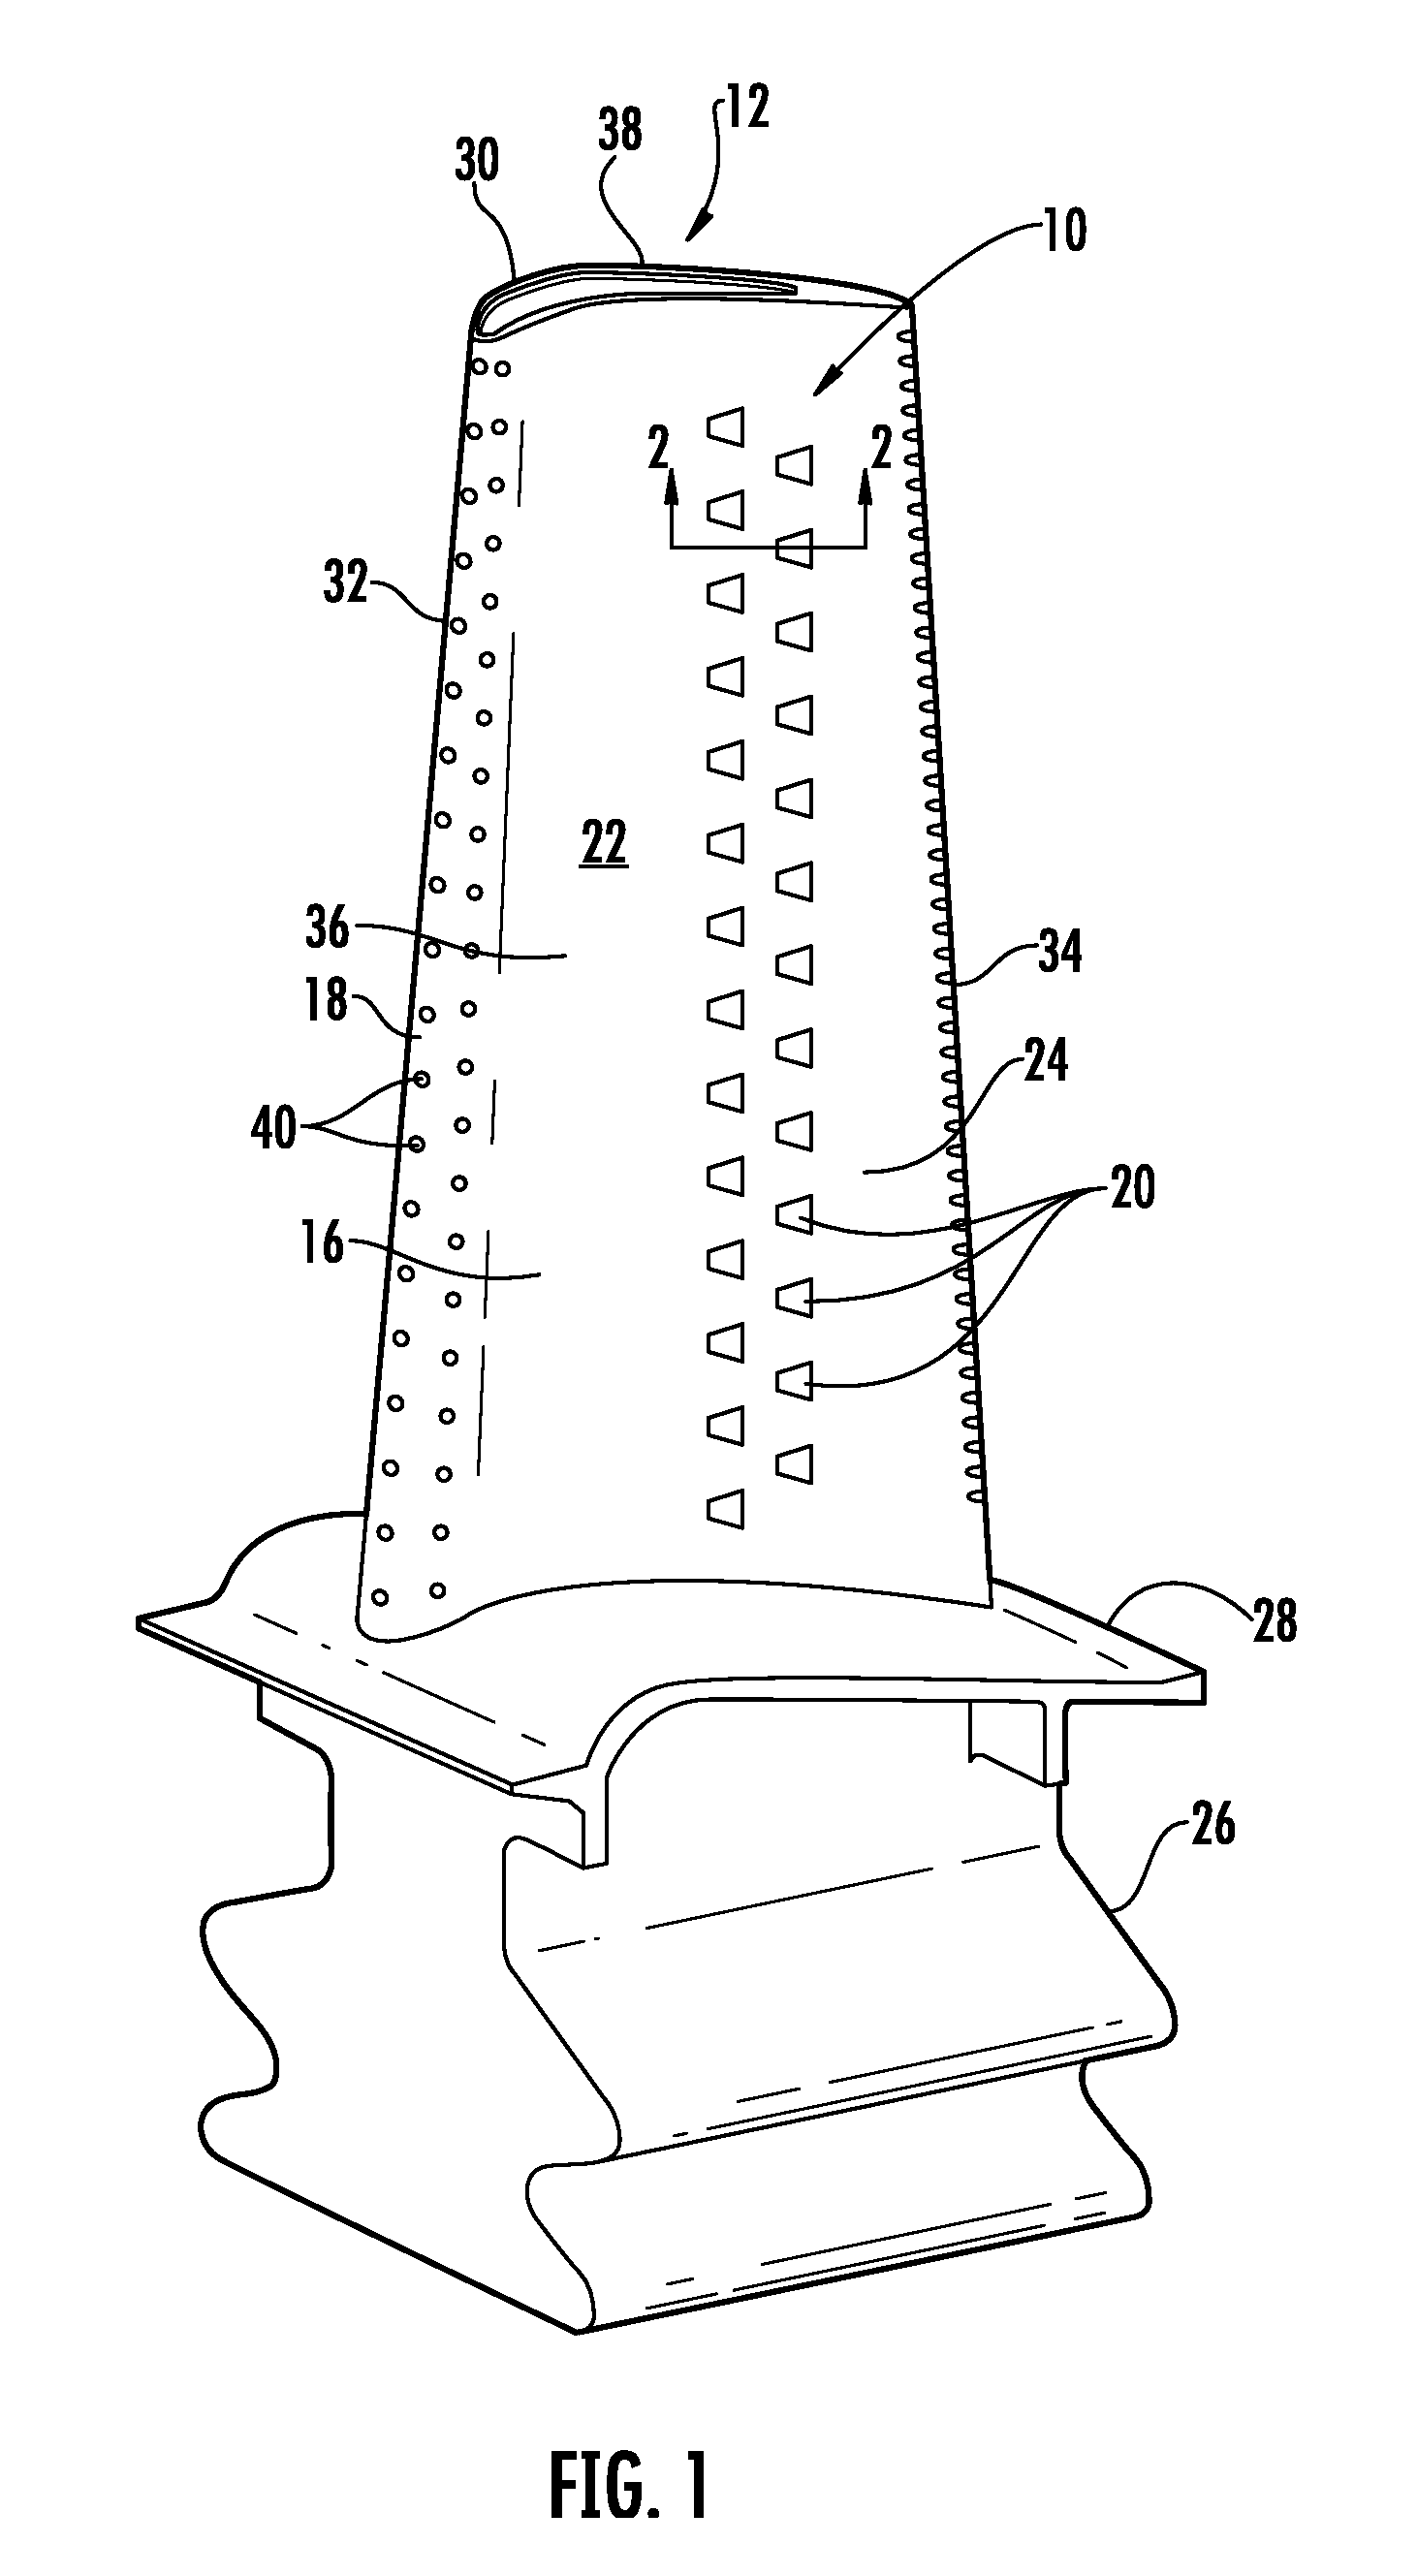 Turbine airfoil cooling system with divergent film cooling hole